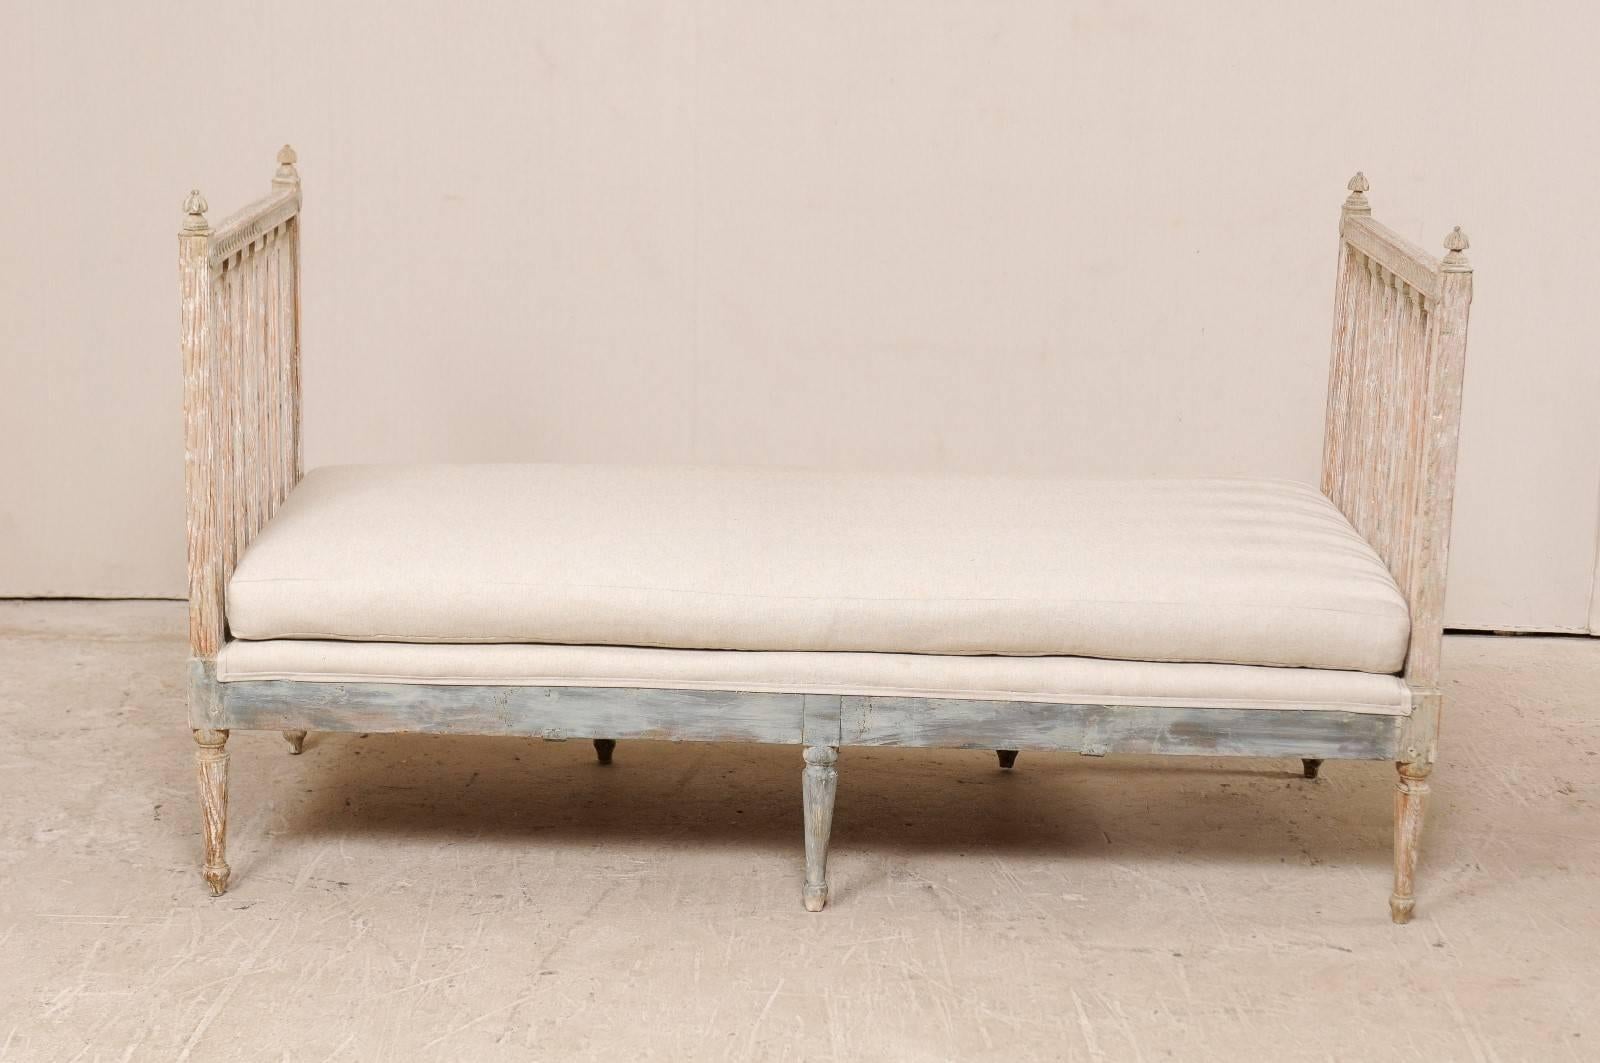 Swedish Period Gustavian Daybed Sofa Bench from the Late 18th Century in Cream 1